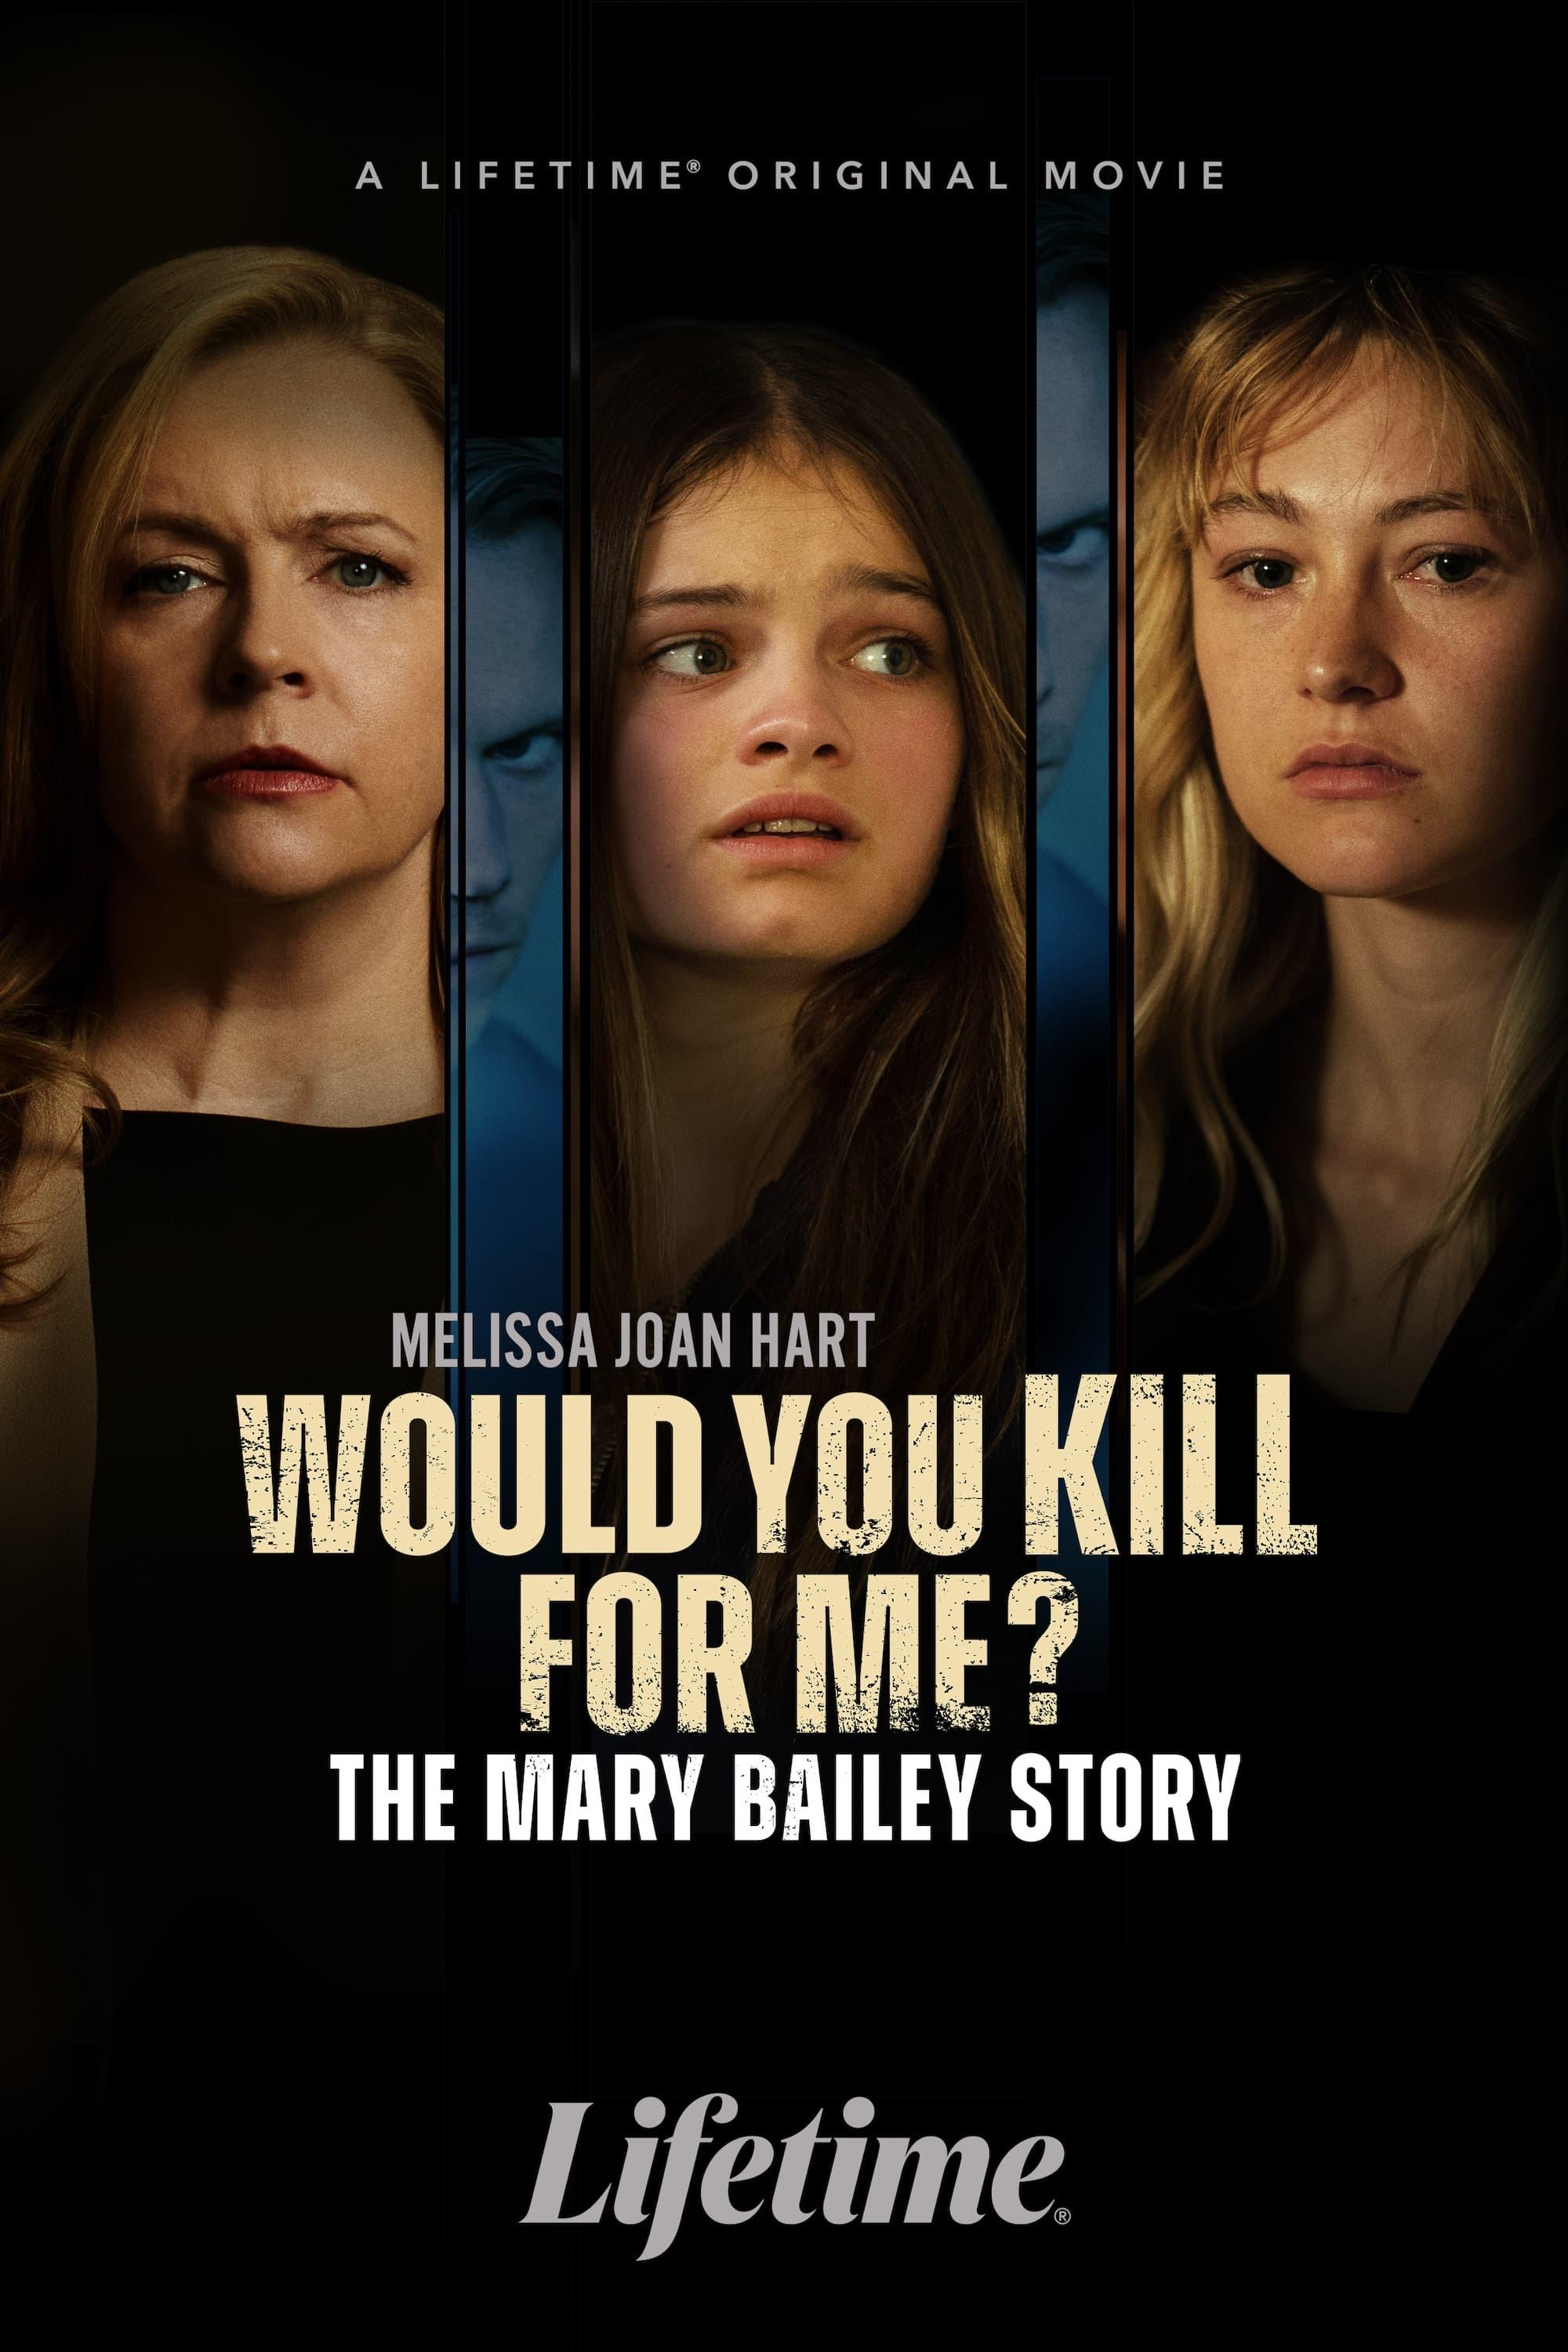 Would You Kill for Me? The Mary Bailey Story poster